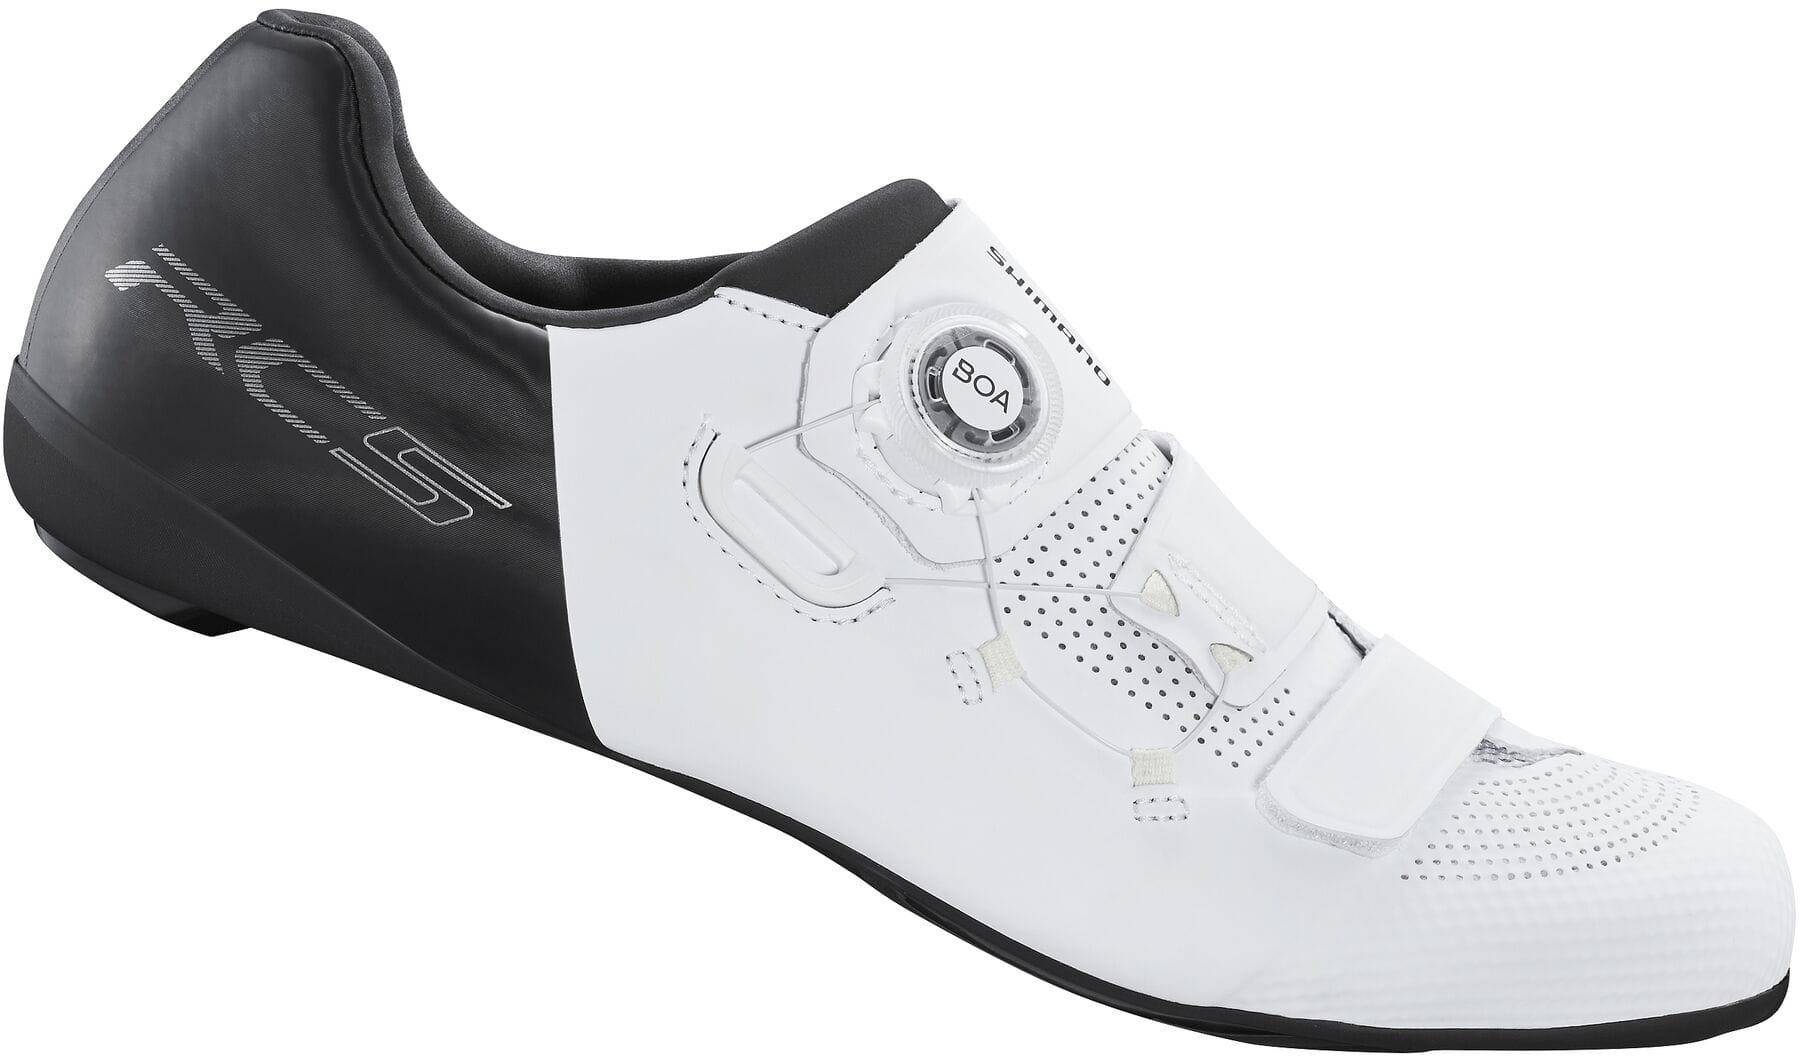 Shimano Rc5 Road Shoes - White